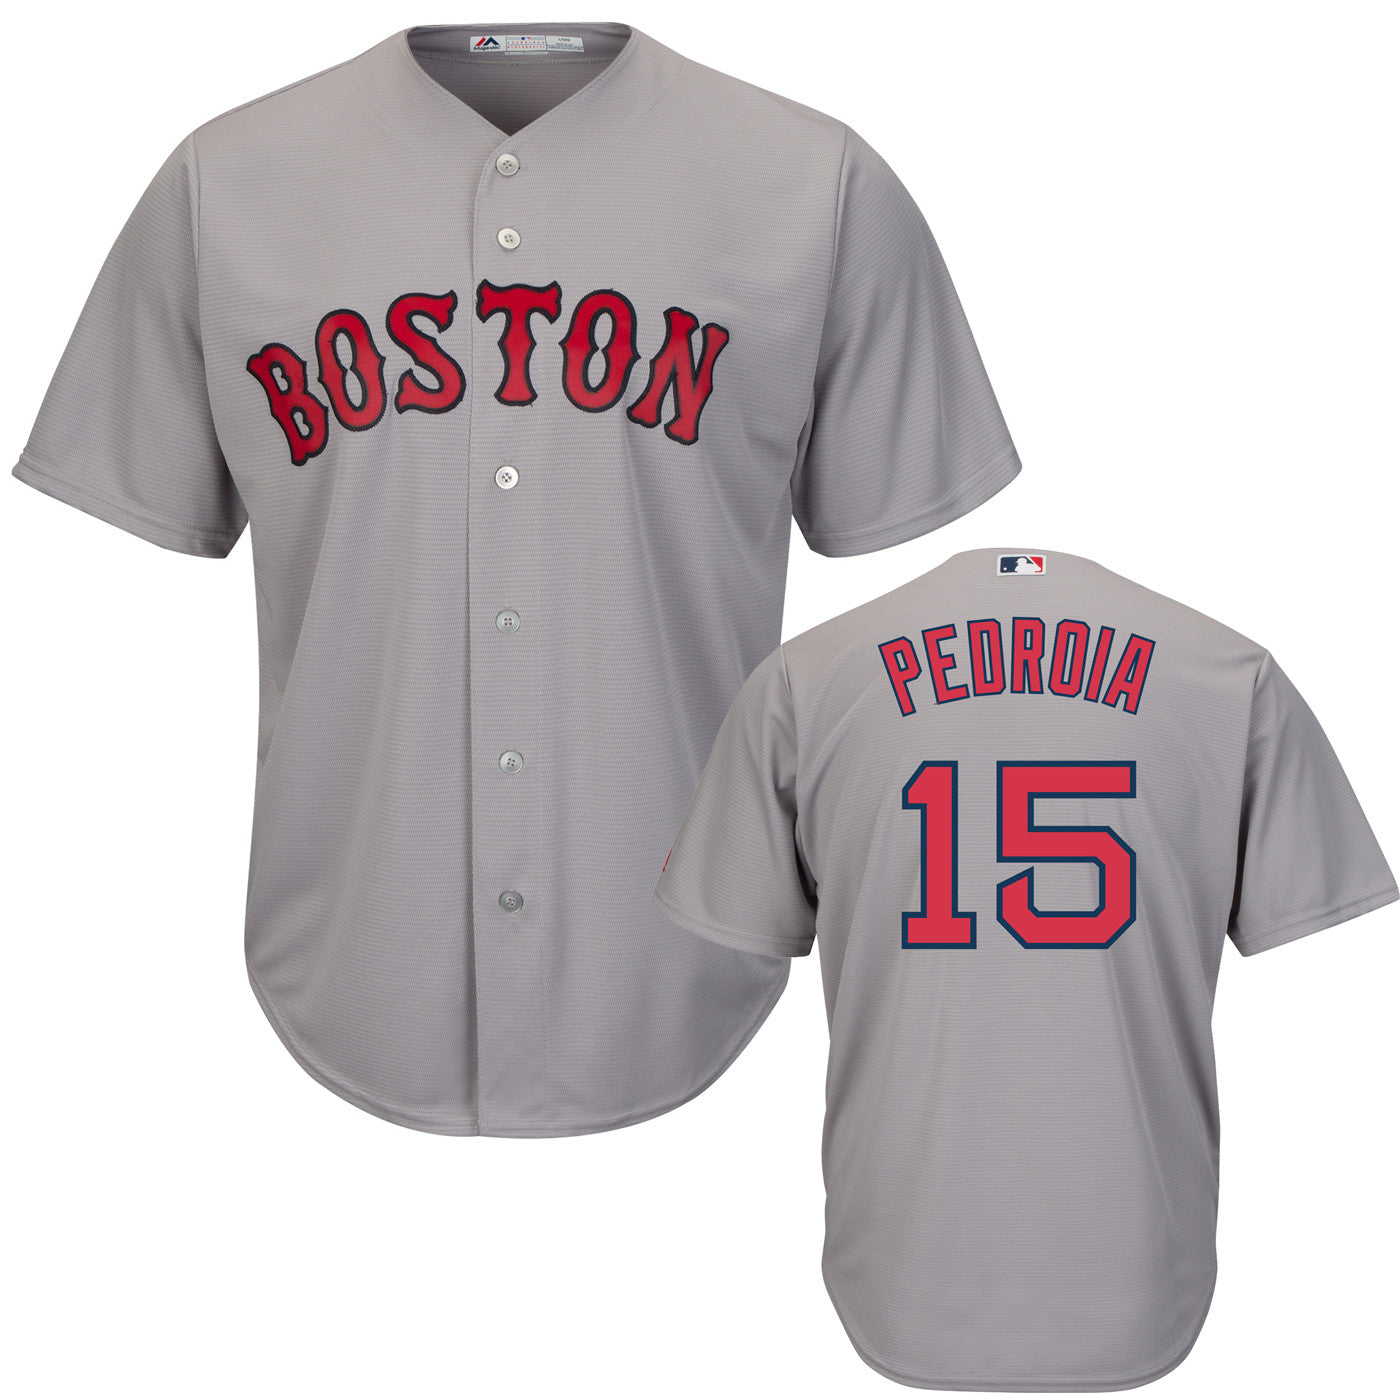 Dustin Pedroia Red Sox Men's Majestic Road Gray Flex Base Collection Player  Jersey